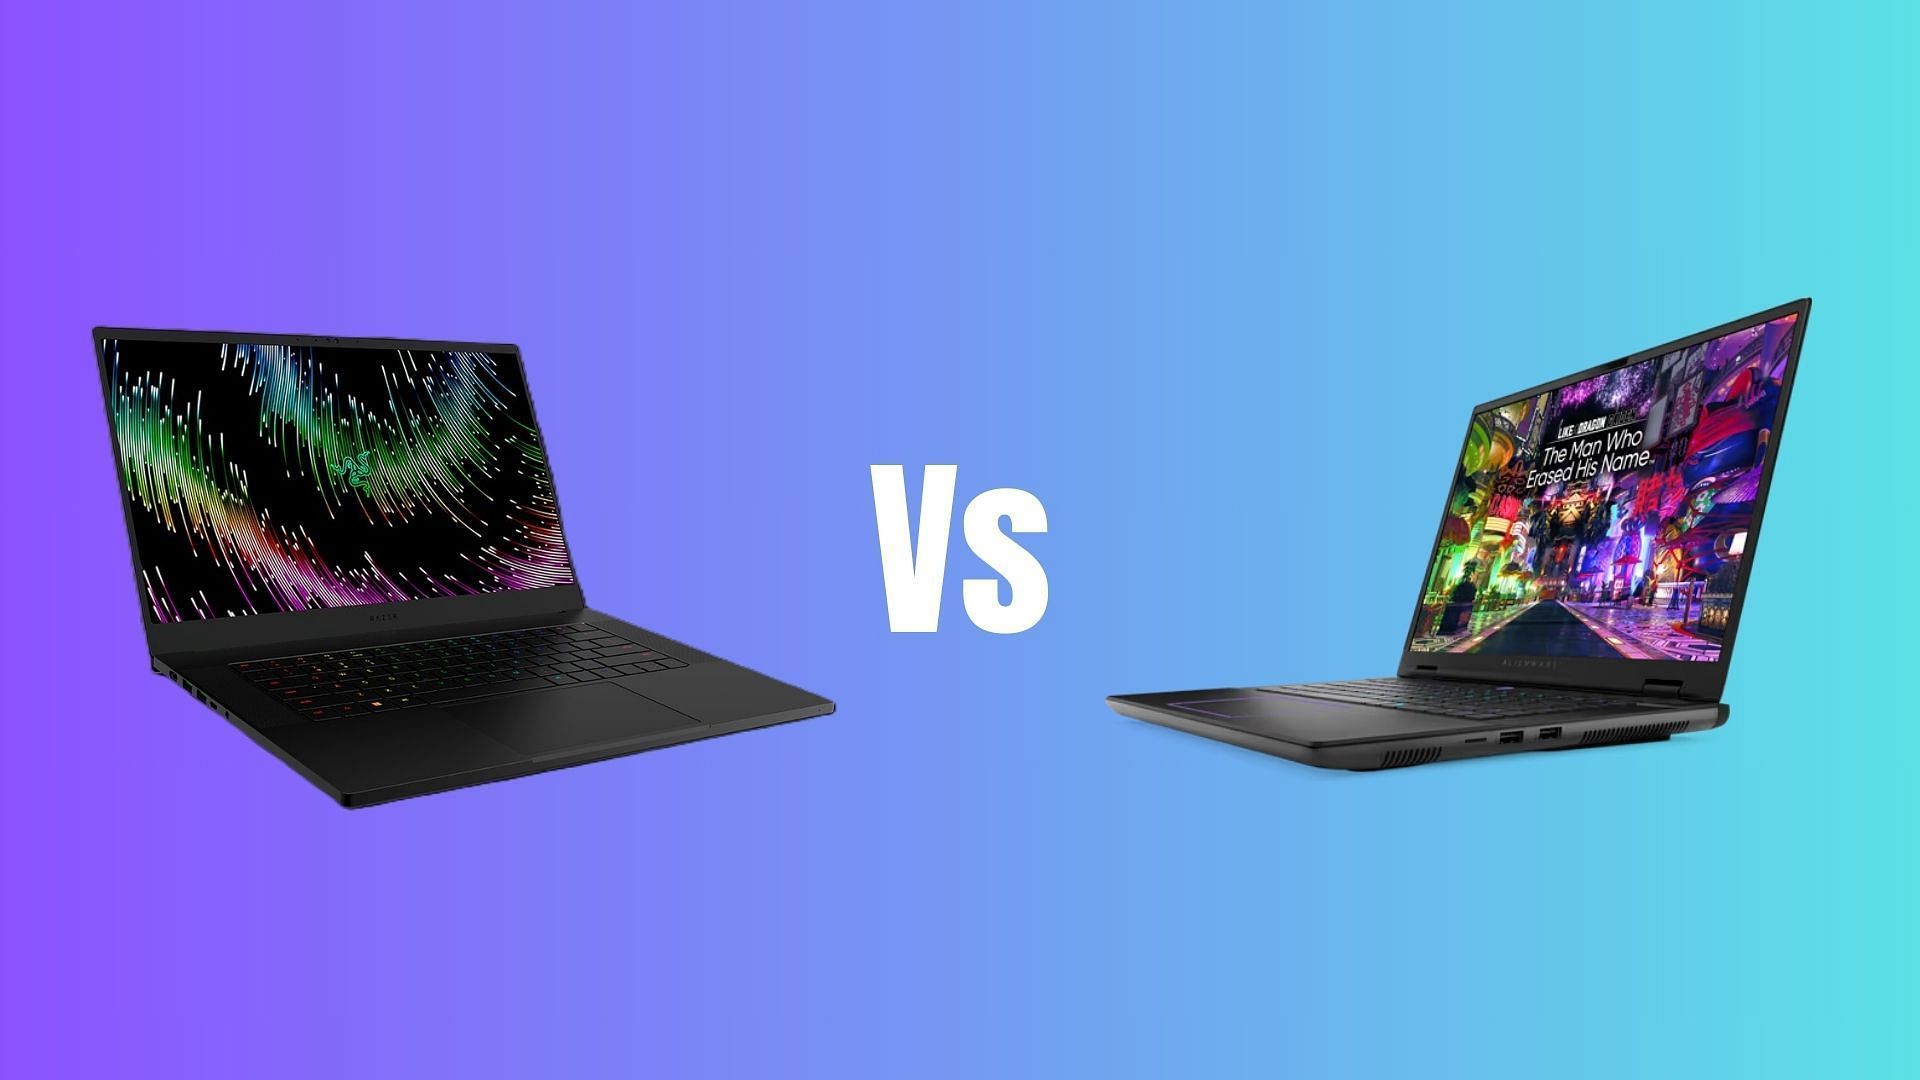 Razer Blade 15 vs Alienware m16 R2: Which is the better gaming laptop? (Image via Razer and Dell)